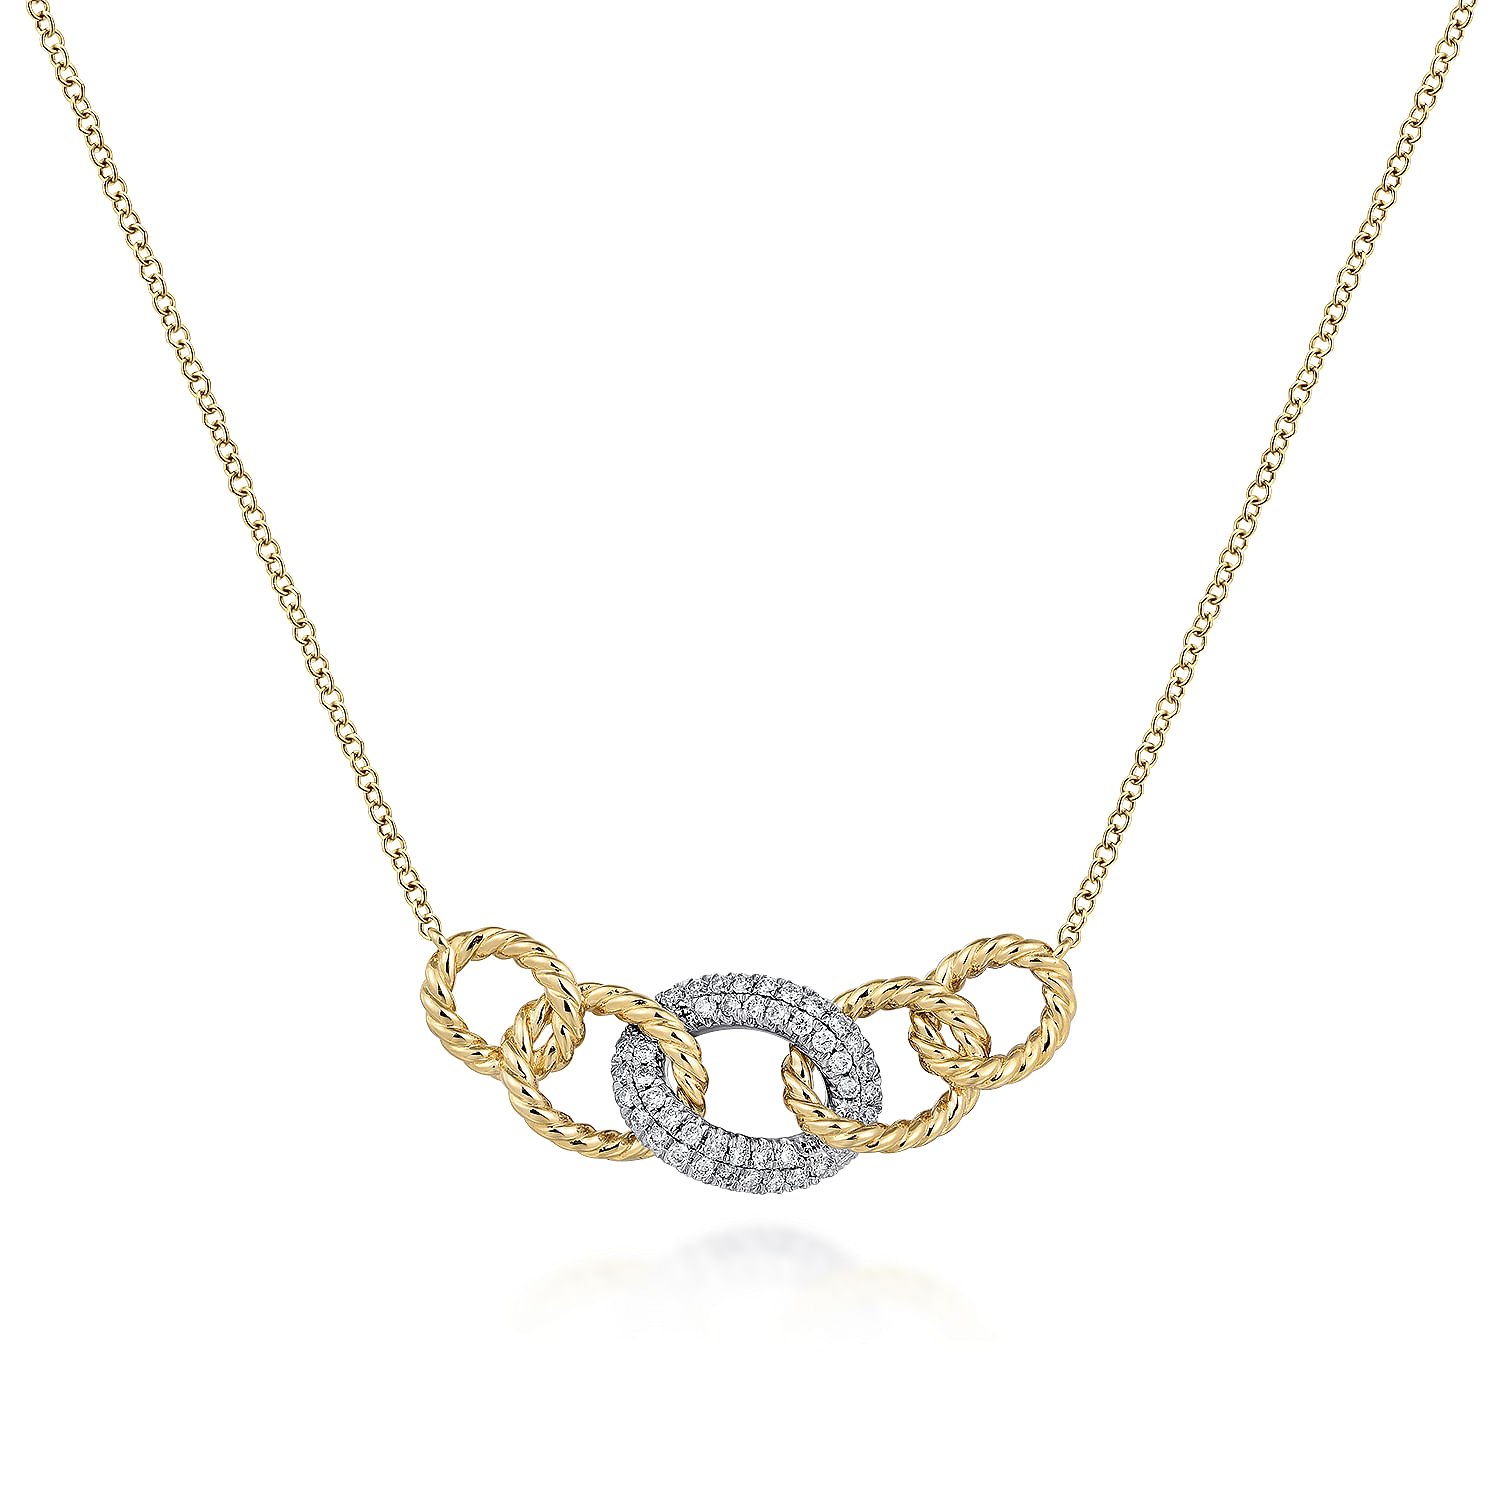 Gabriel - 14K Yellow-White Gold Twisted Rope Link Necklace with Pavé Diamond Link Station